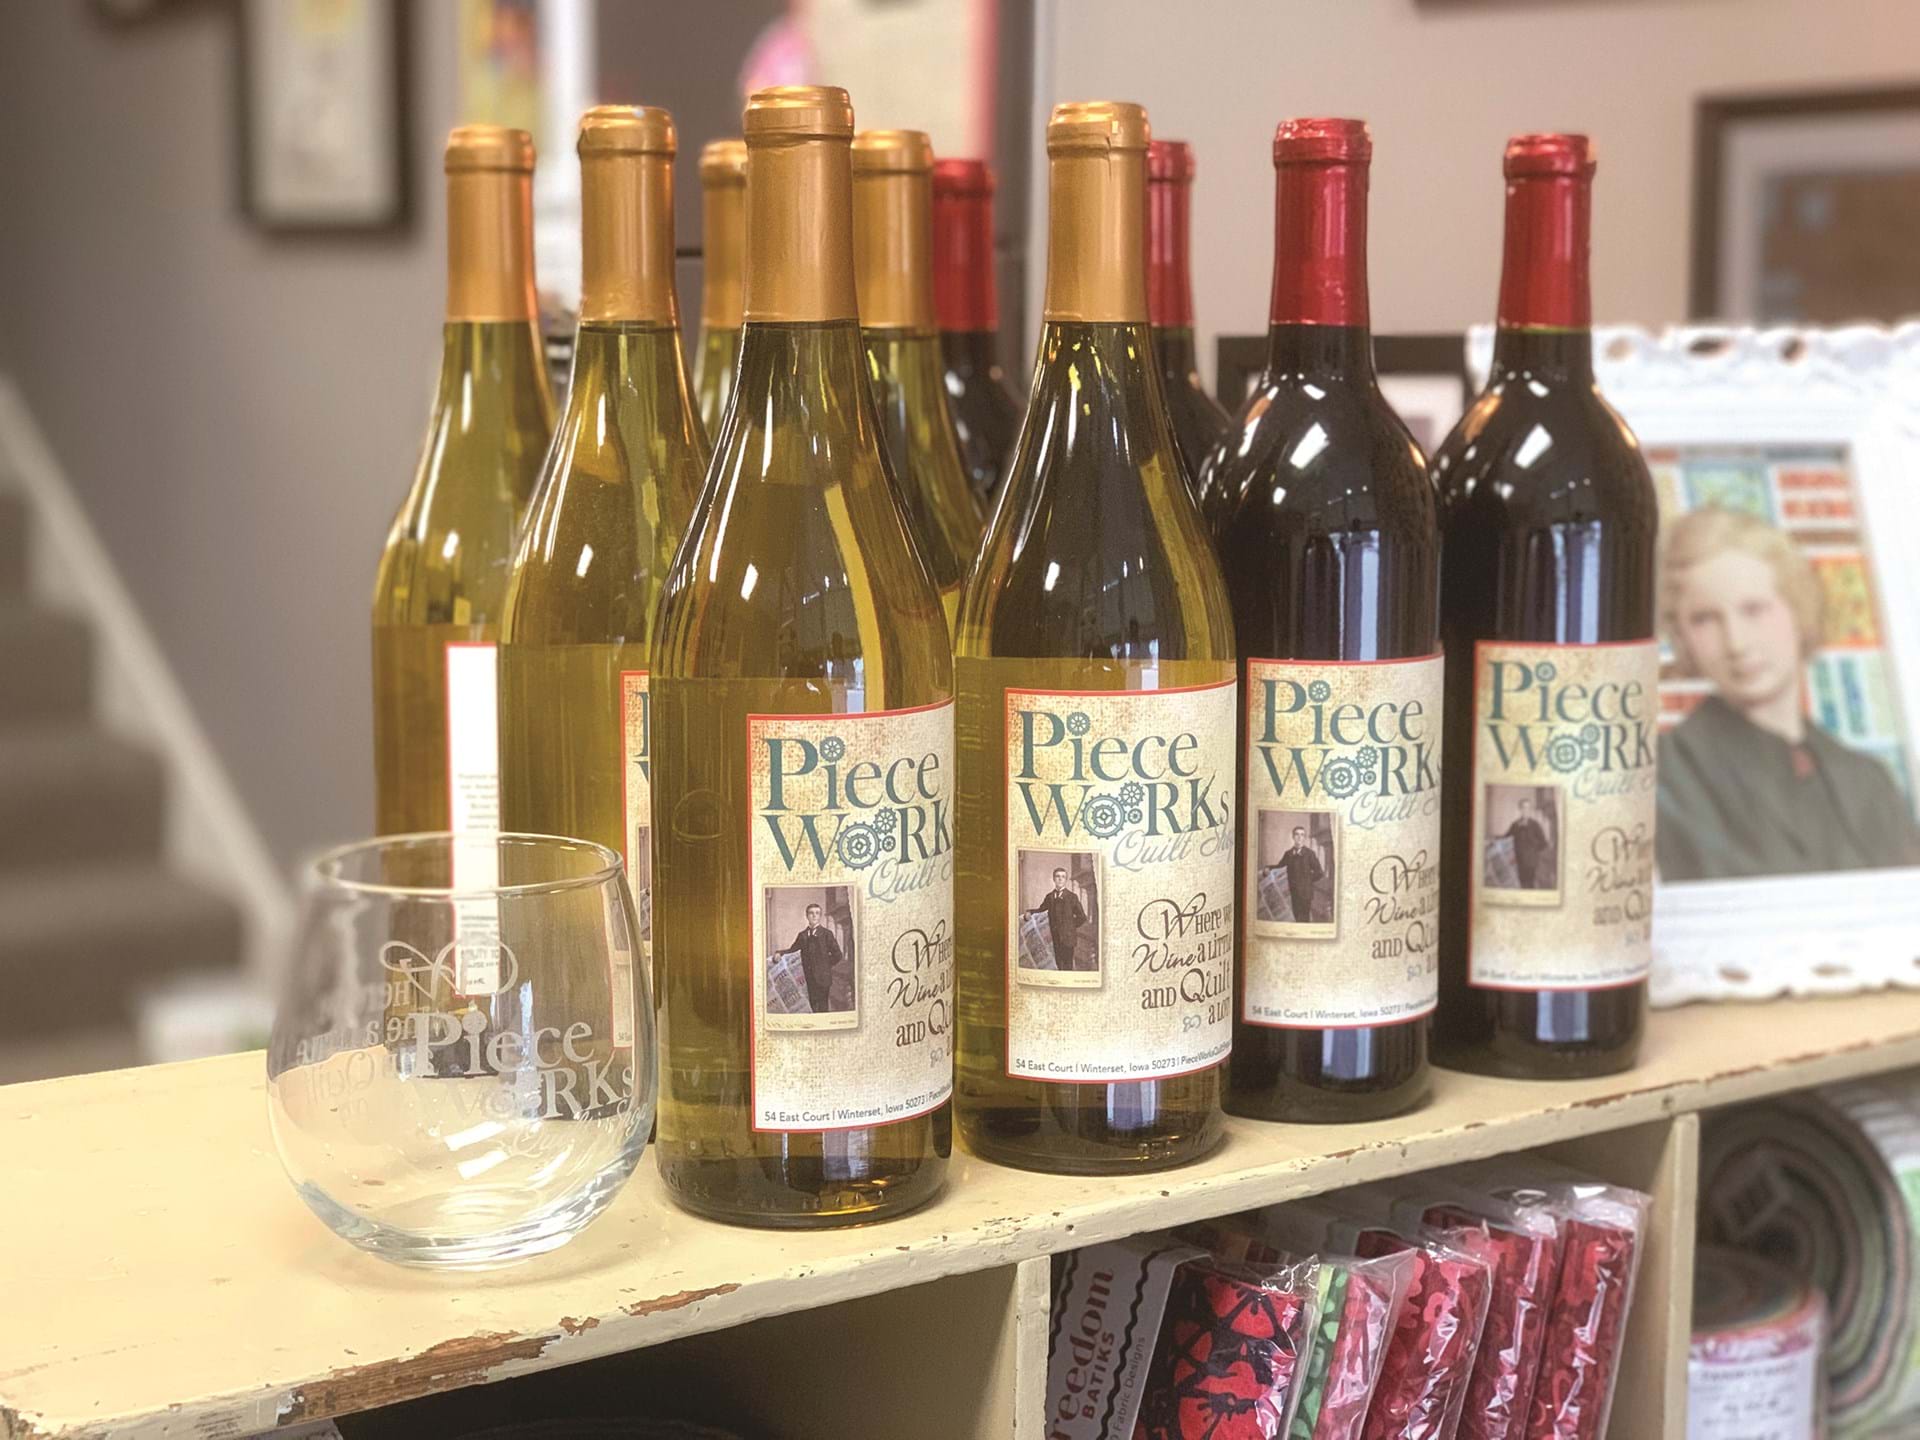 Our private label wine makes great gifts for quilters.